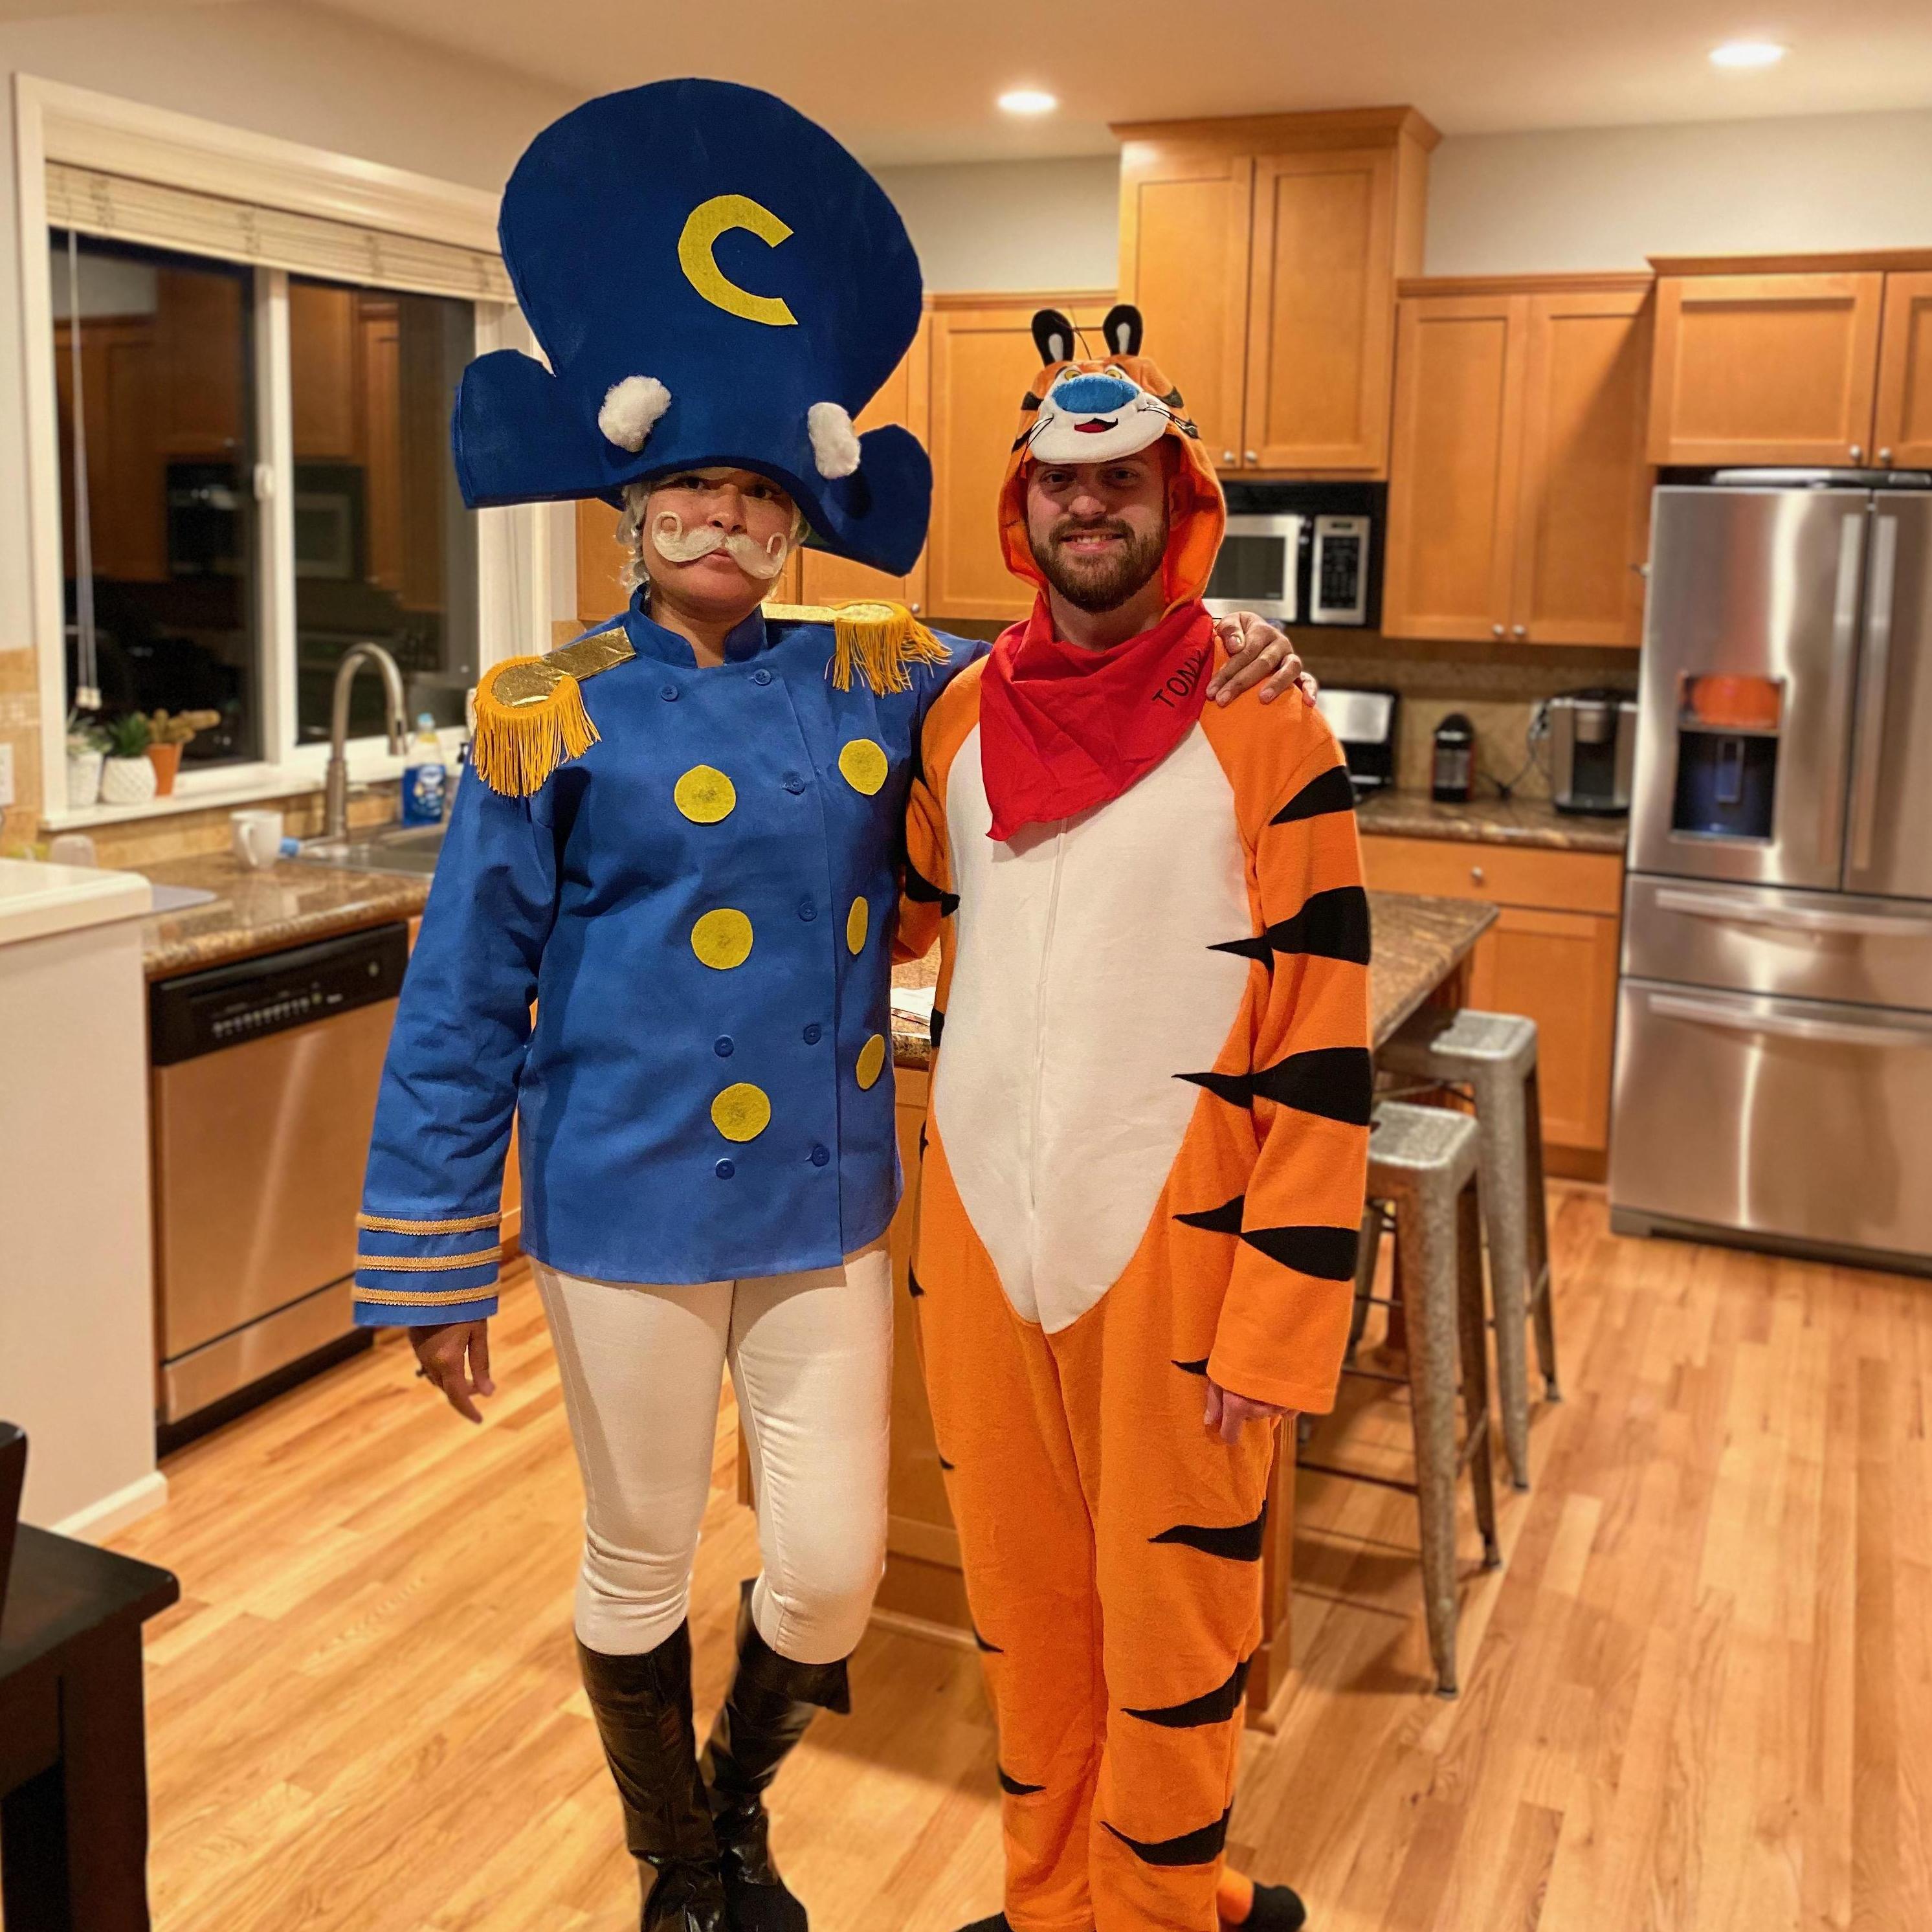 So much fun doing our first couples costume